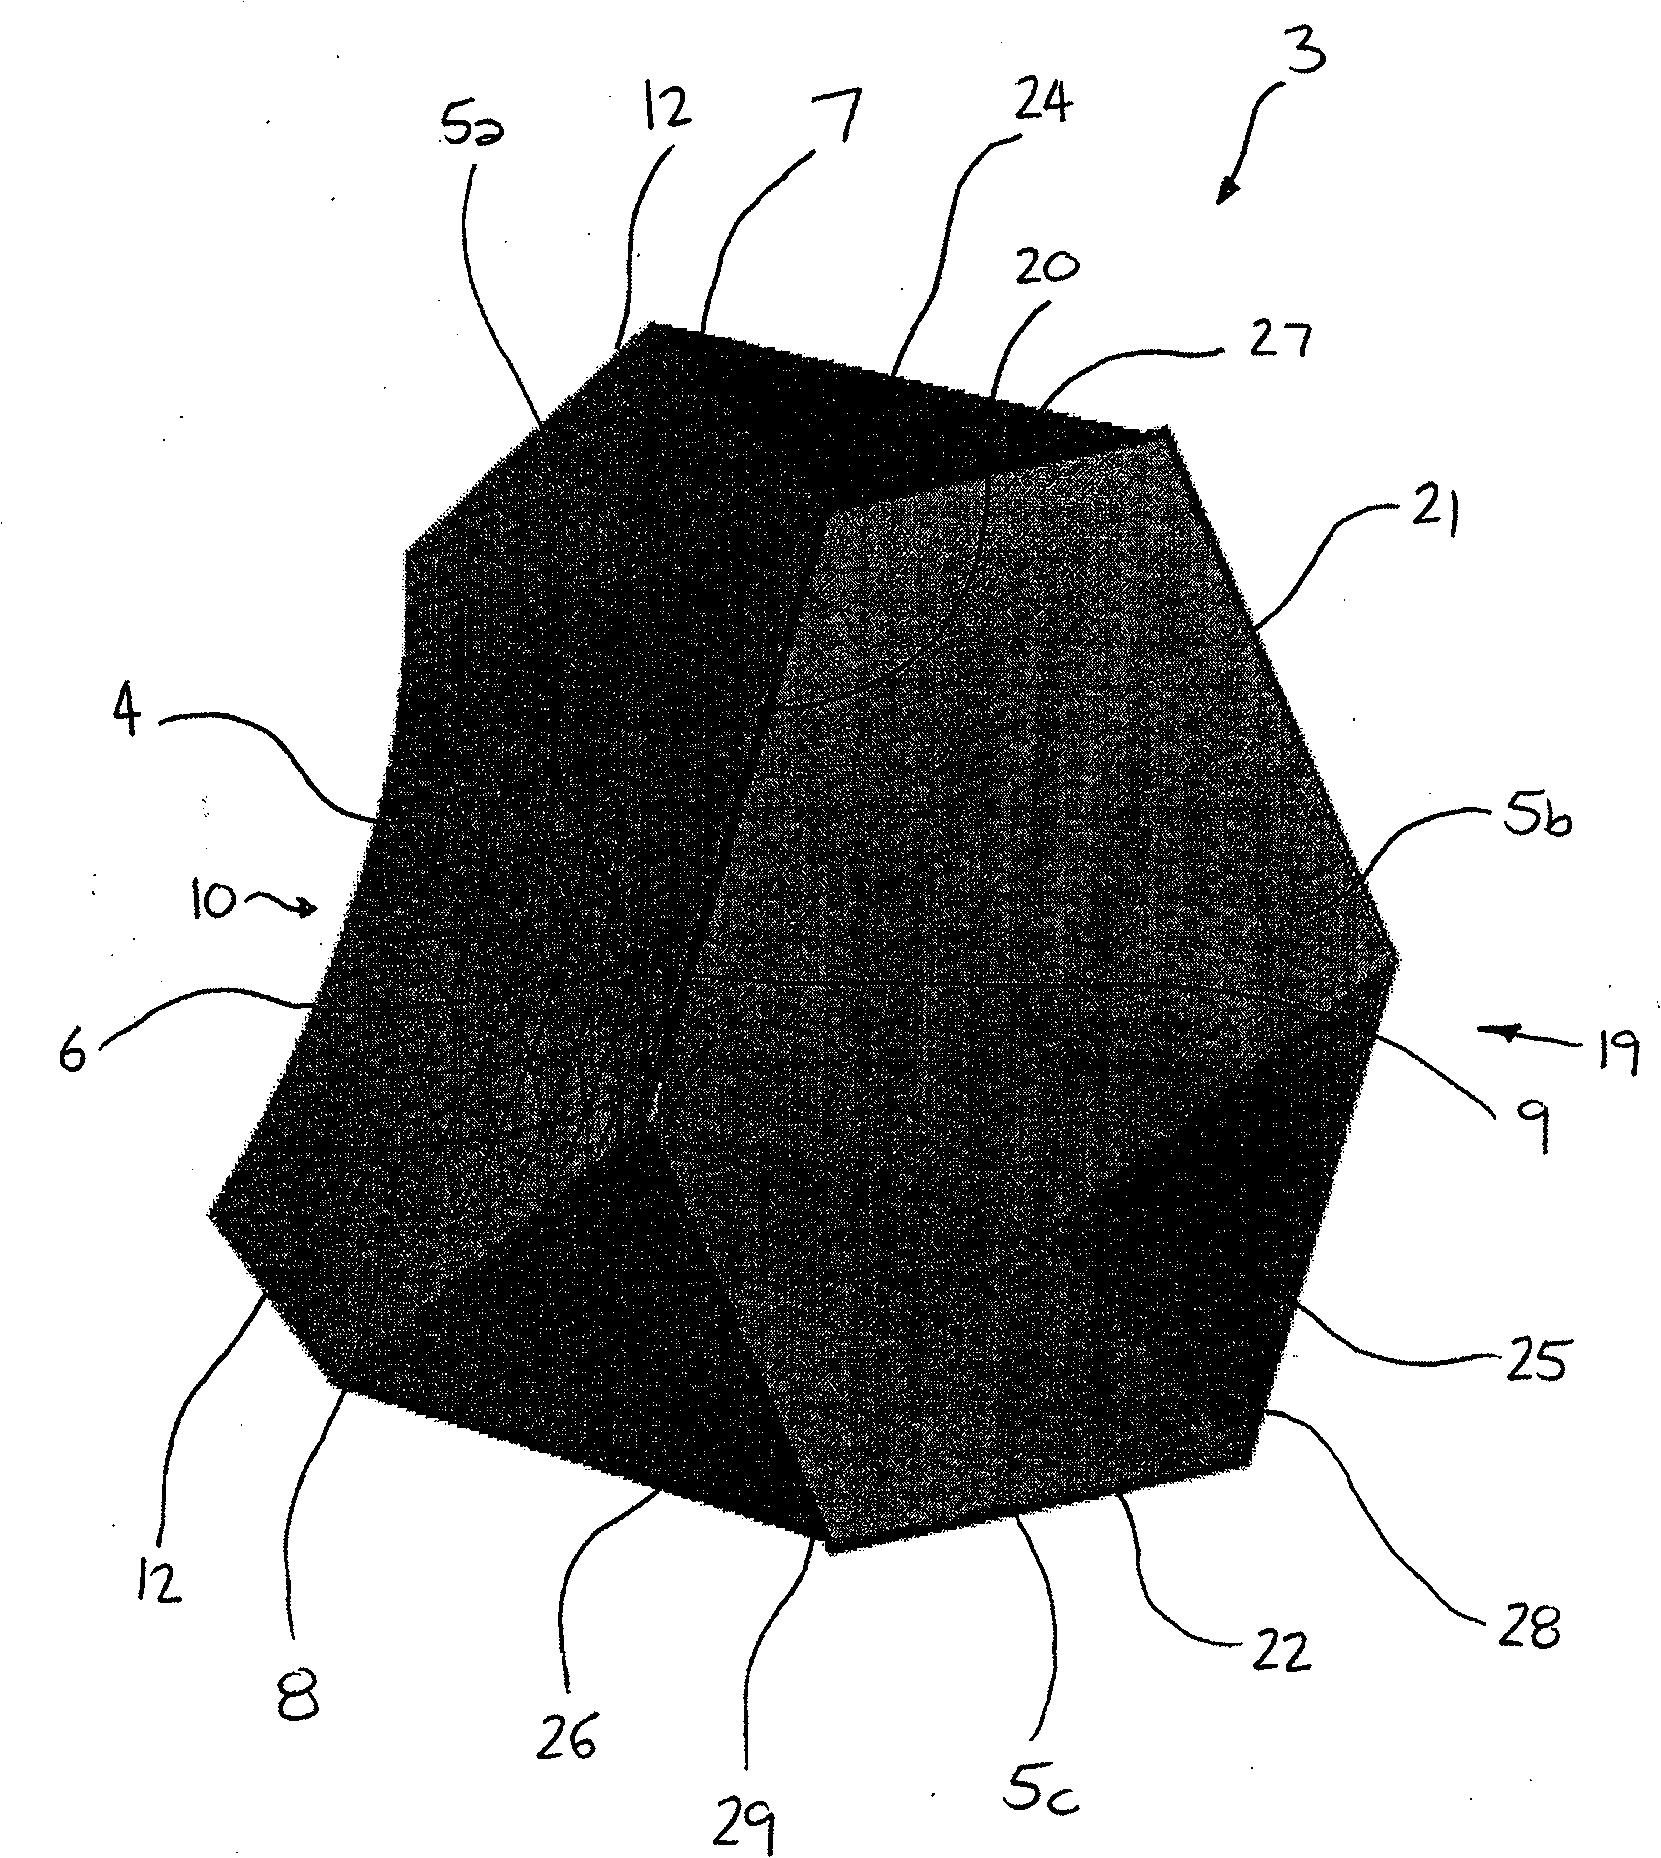 Visual image display apparatus and method of using the apparatus to form a desired image